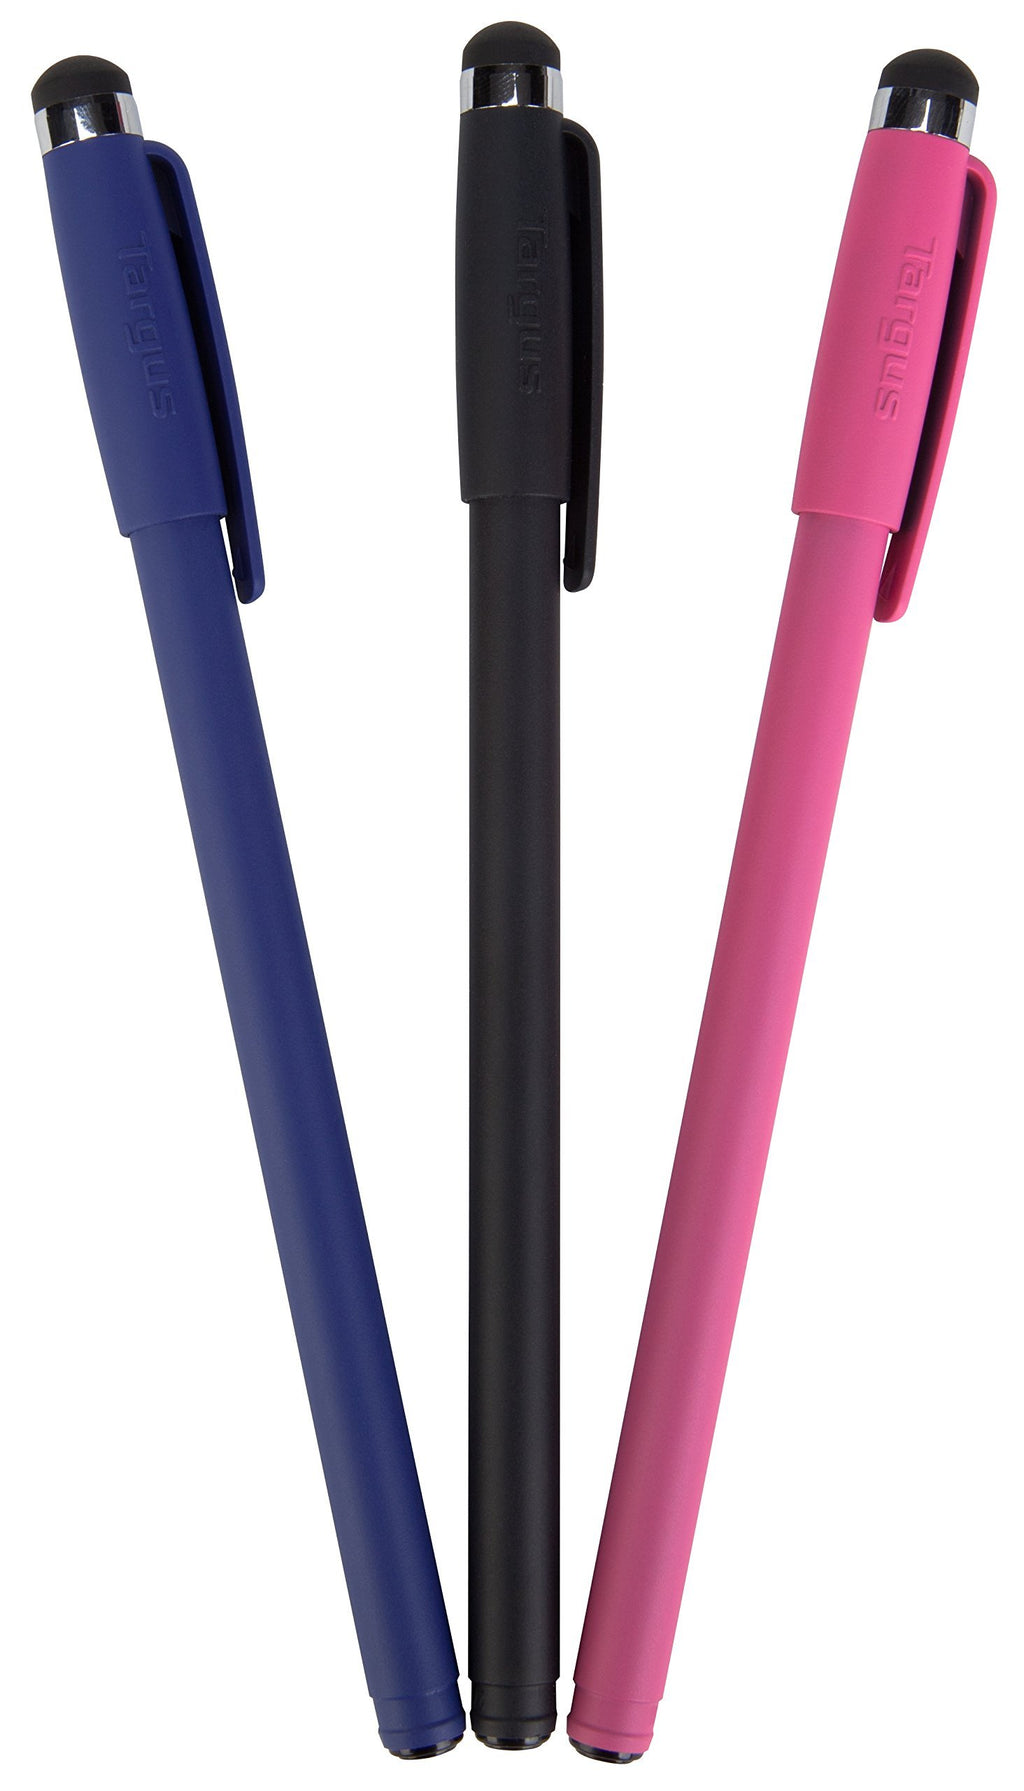 Targus Stylus Pen for Tablets, Apple iPads, Samsung Galaxy, and ALL Touchscreen devices with Slim Durable Rubber Tip - 3 Pack - Black/Blue/Red (AMM0601TBUS)